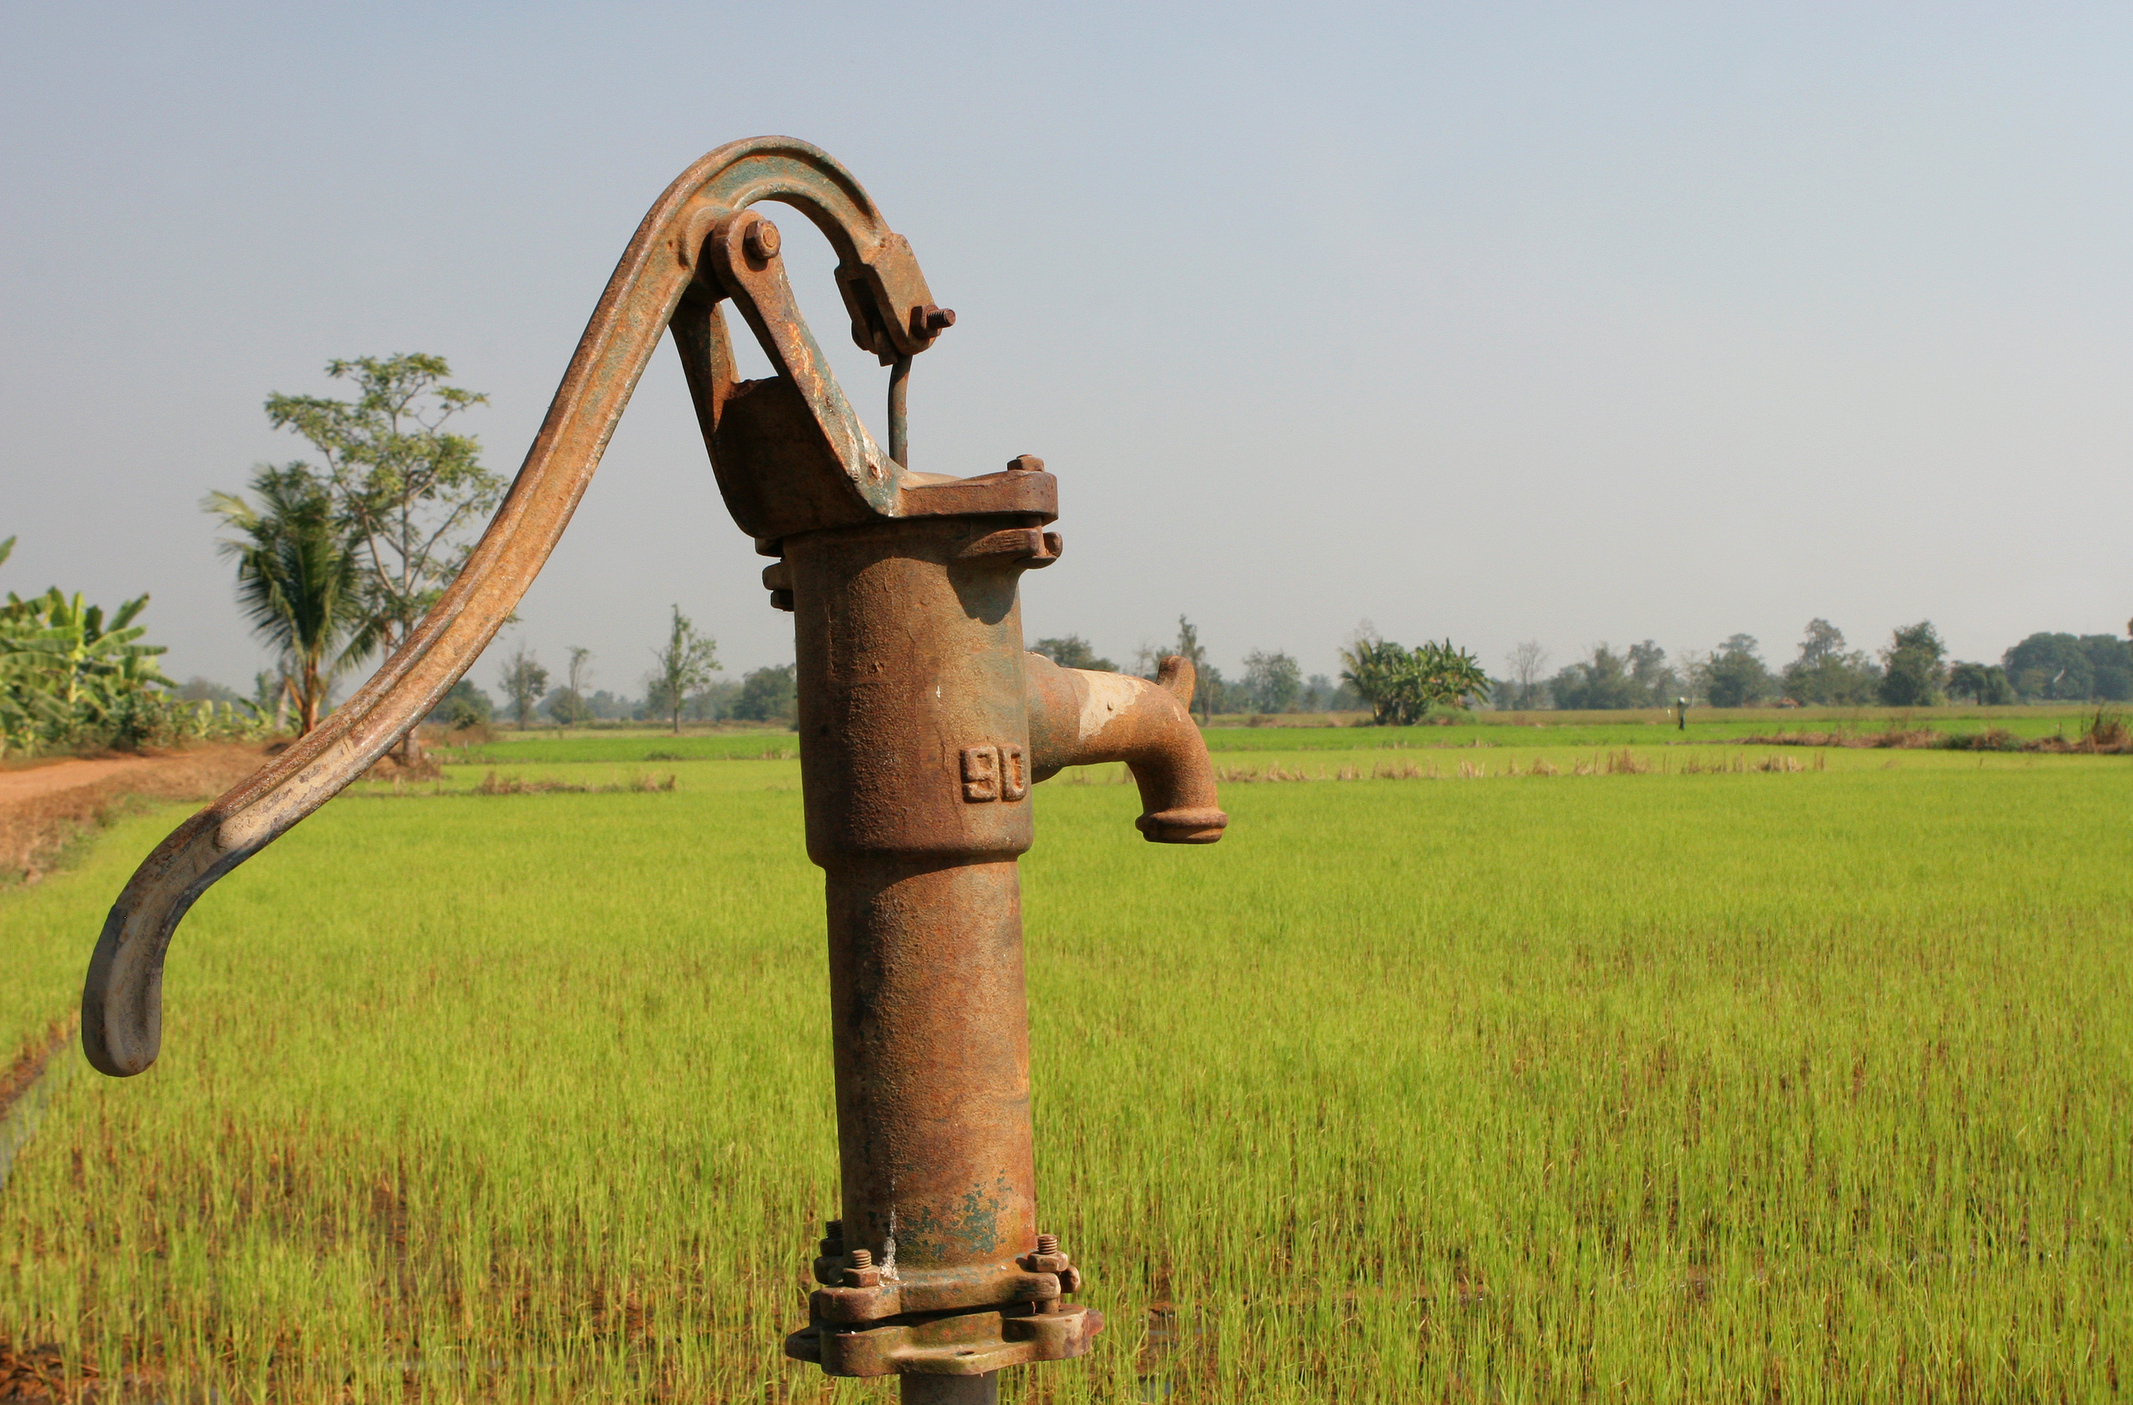 A hand-cranked pump in a rice field